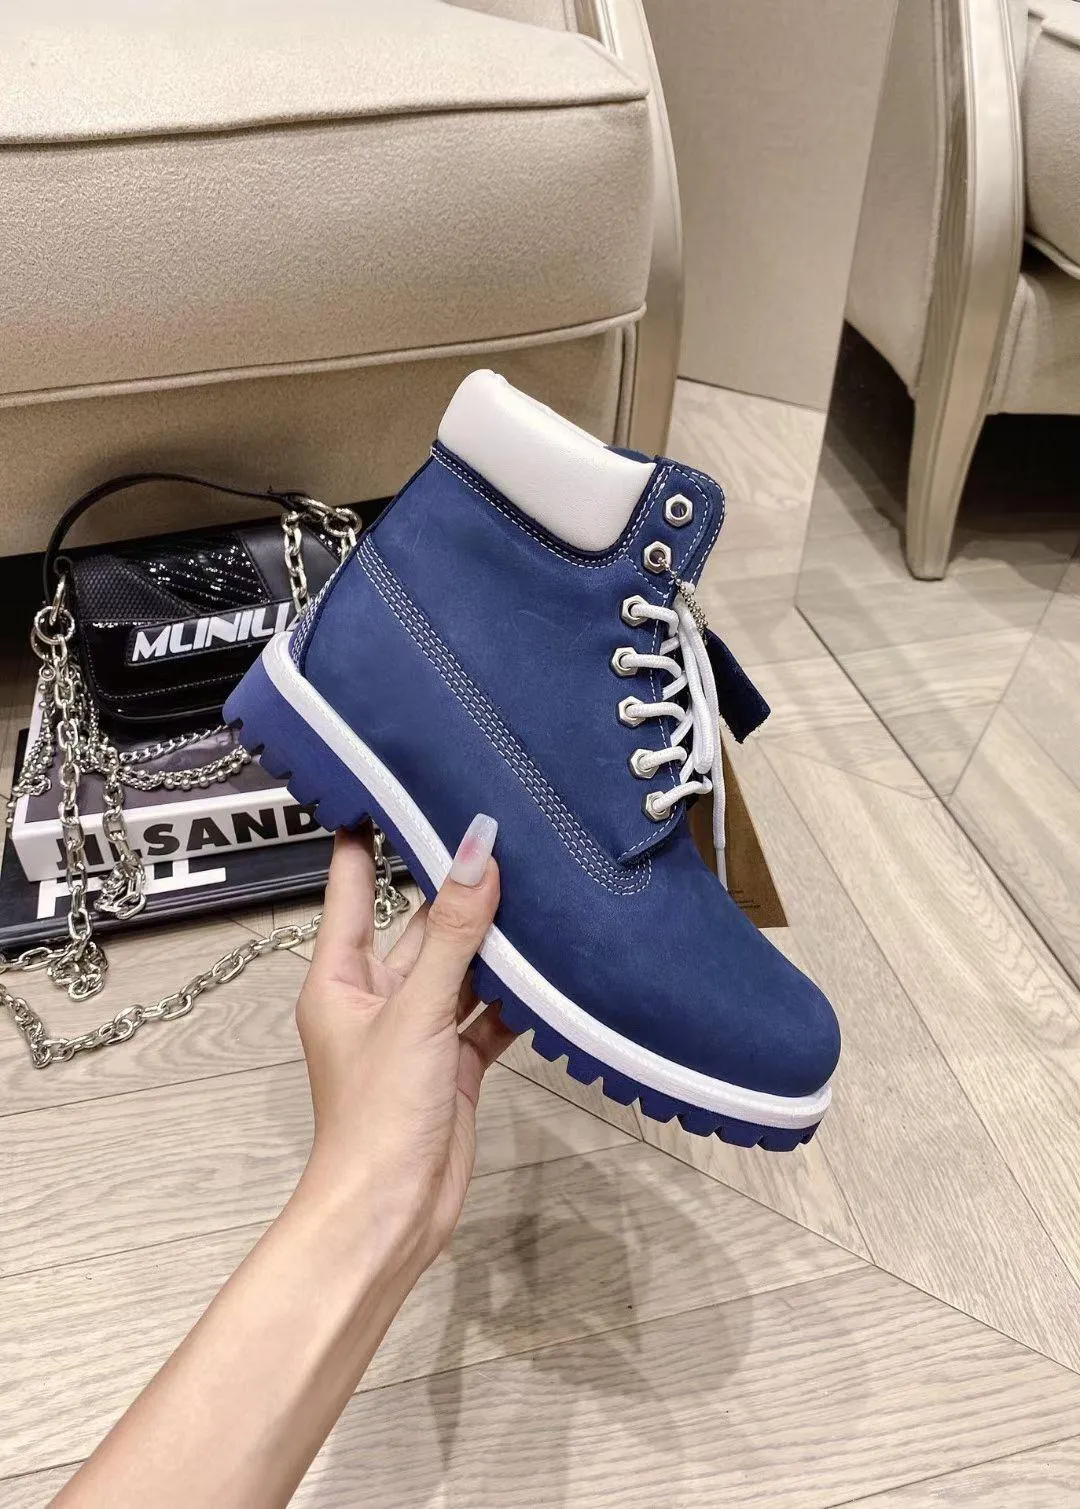 womens Casual Sports shoes Travel women boots lace-up sneaker 100% leather gym Thick soled men High top shoe designer boot platform lady Trainers size 35-41-43-45 With box